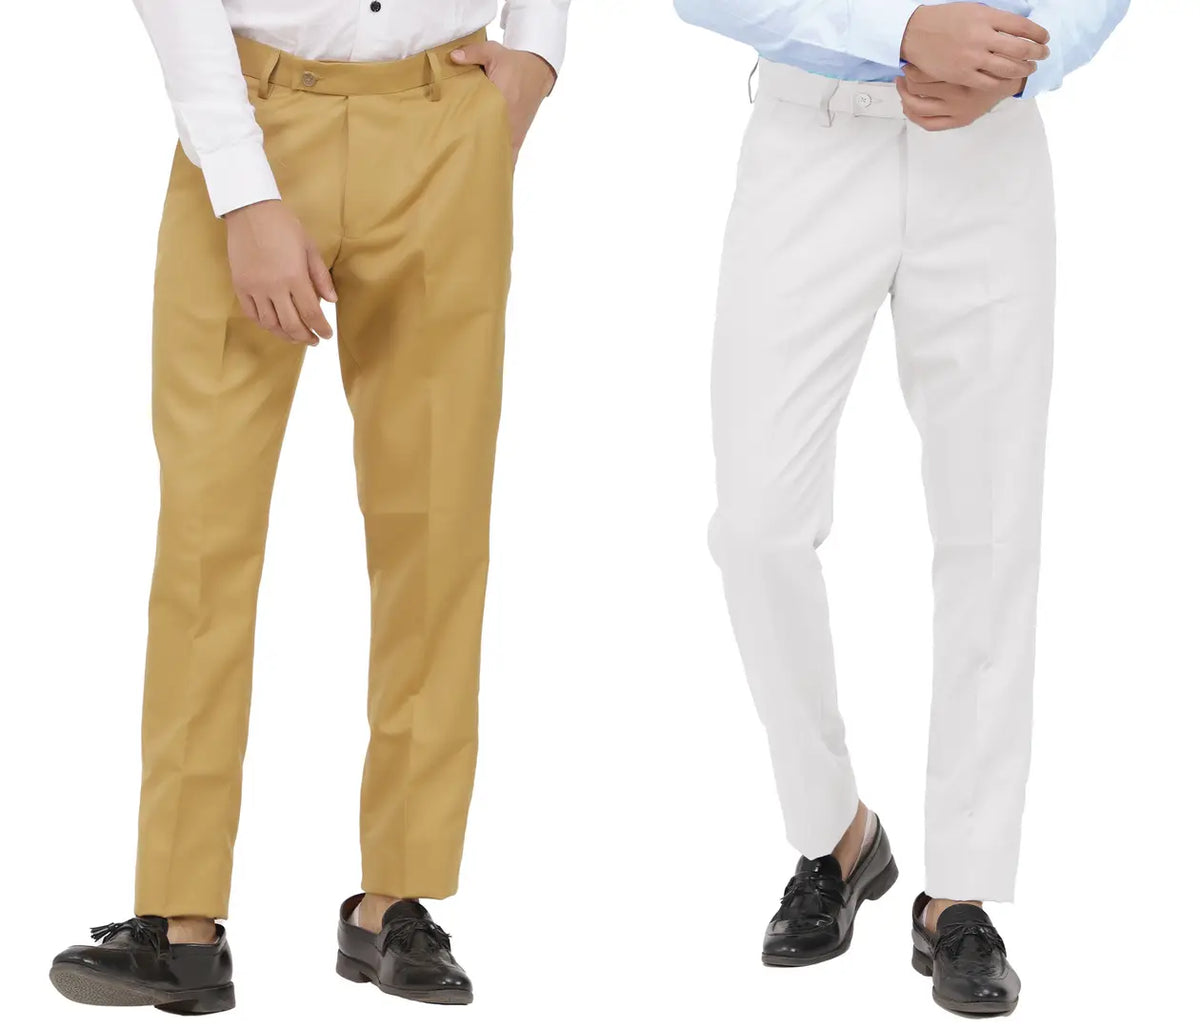 Kundan Men Poly-Viscose Blended Khaki and White Formal Trousers ( Pack of 2 Trousers )